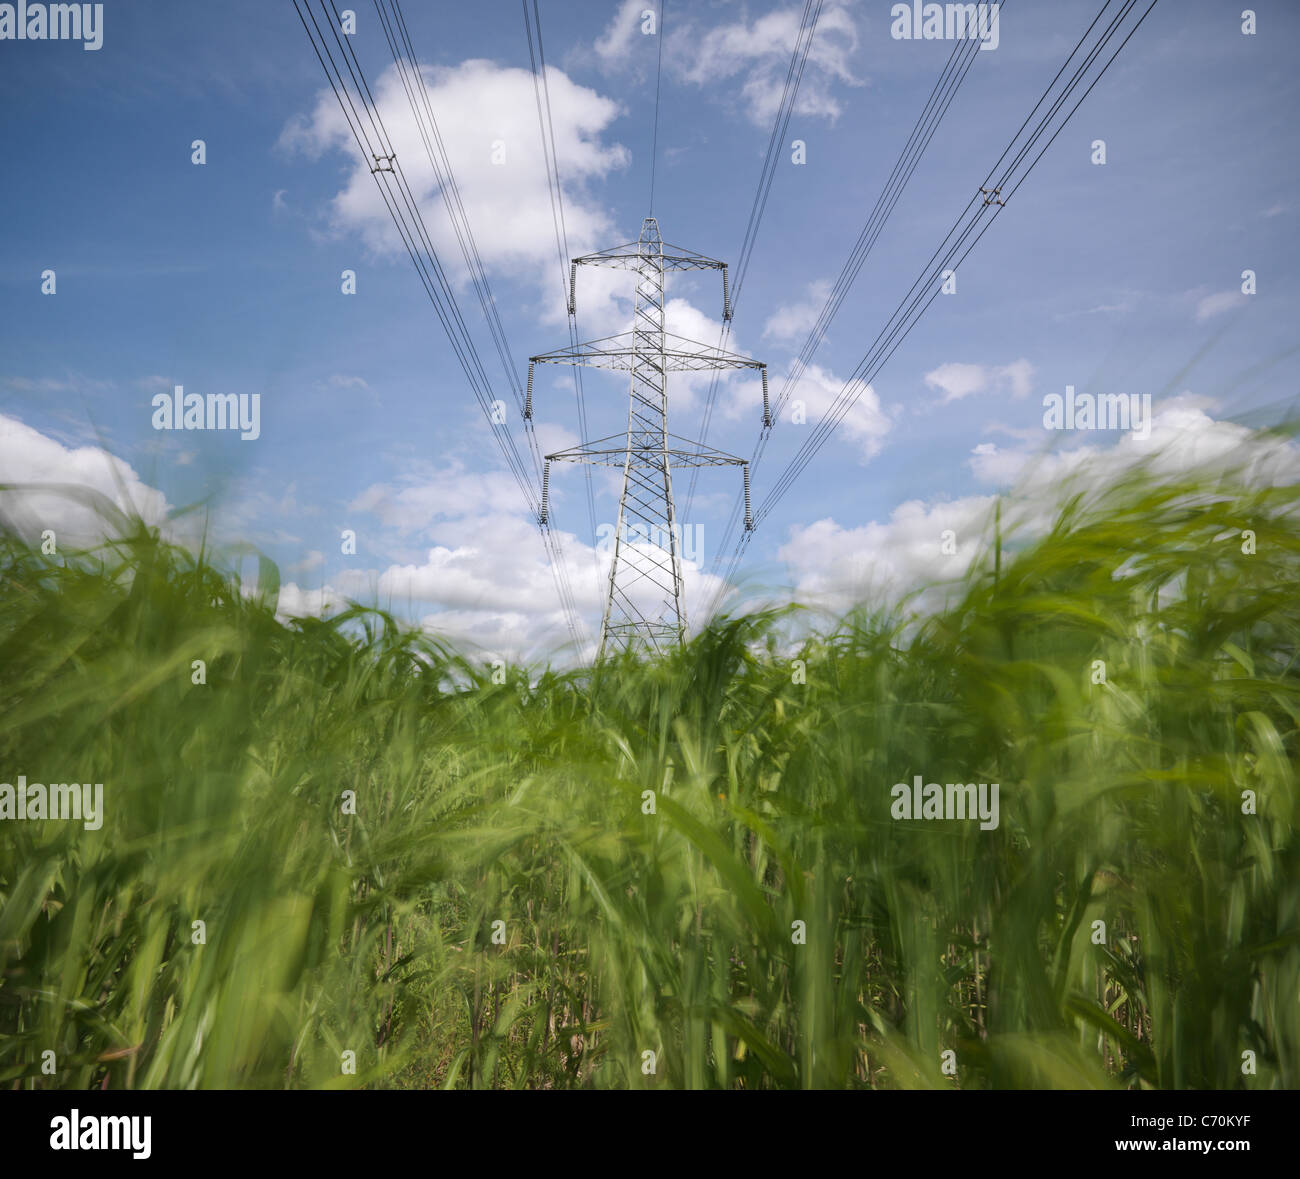 Biomass fuel crop growing by power lines Stock Photo